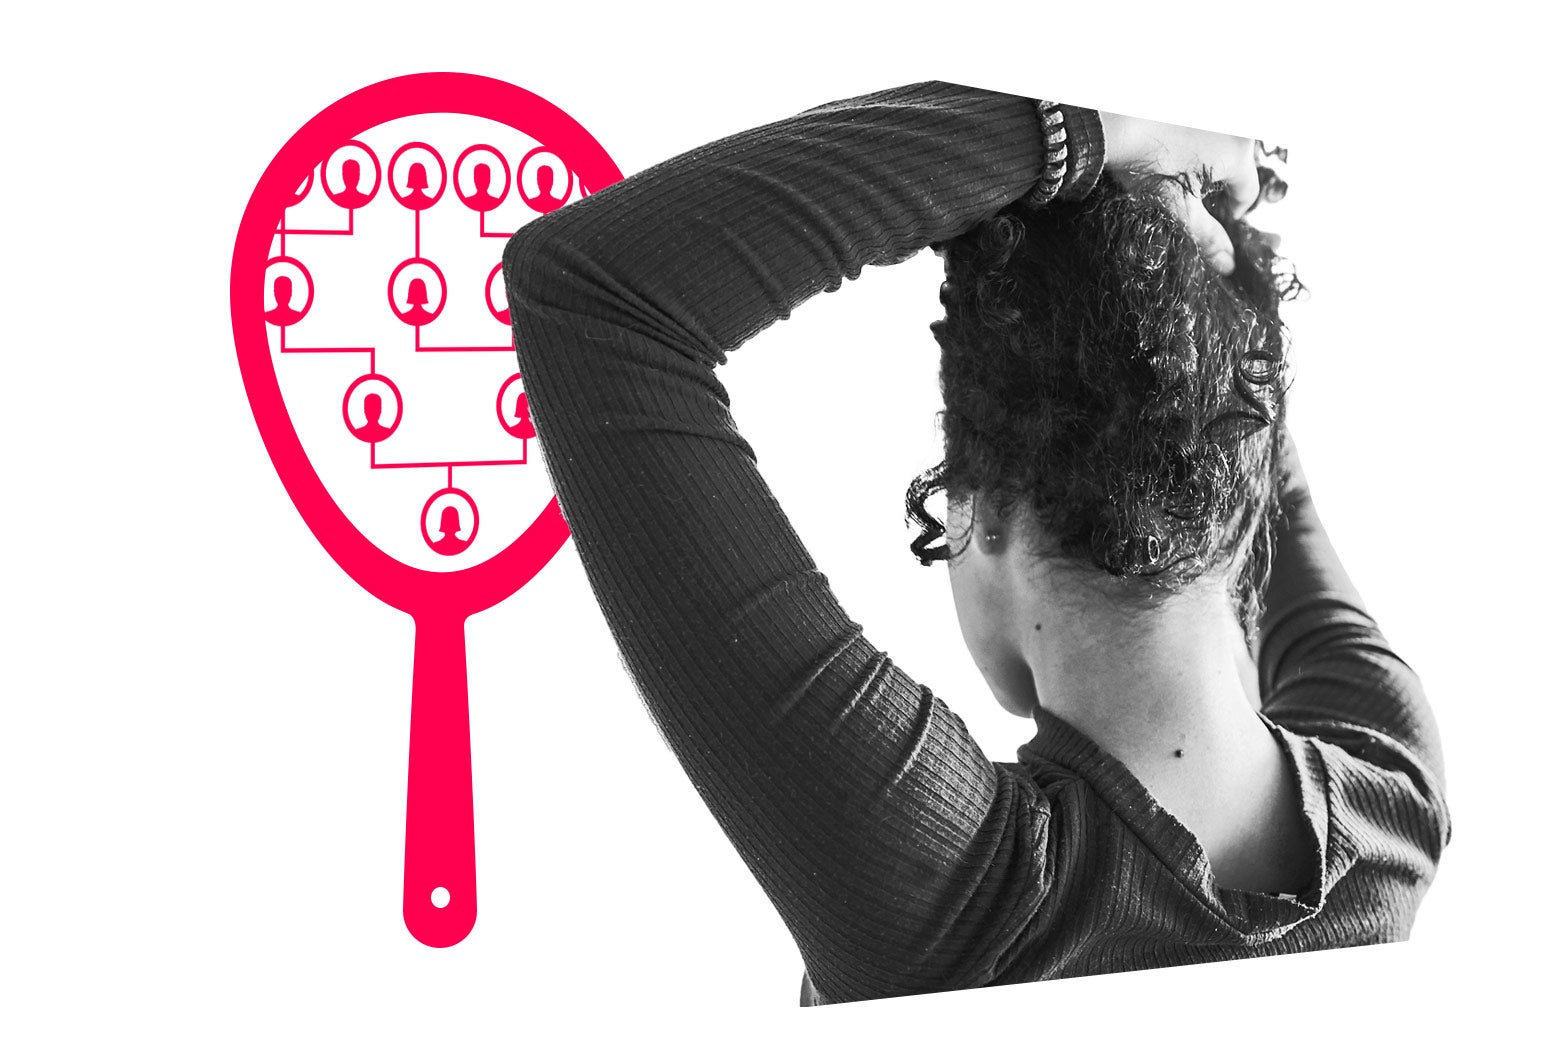 A woman fixing her hair, looking into a graphic mirror that depicts a family tree.